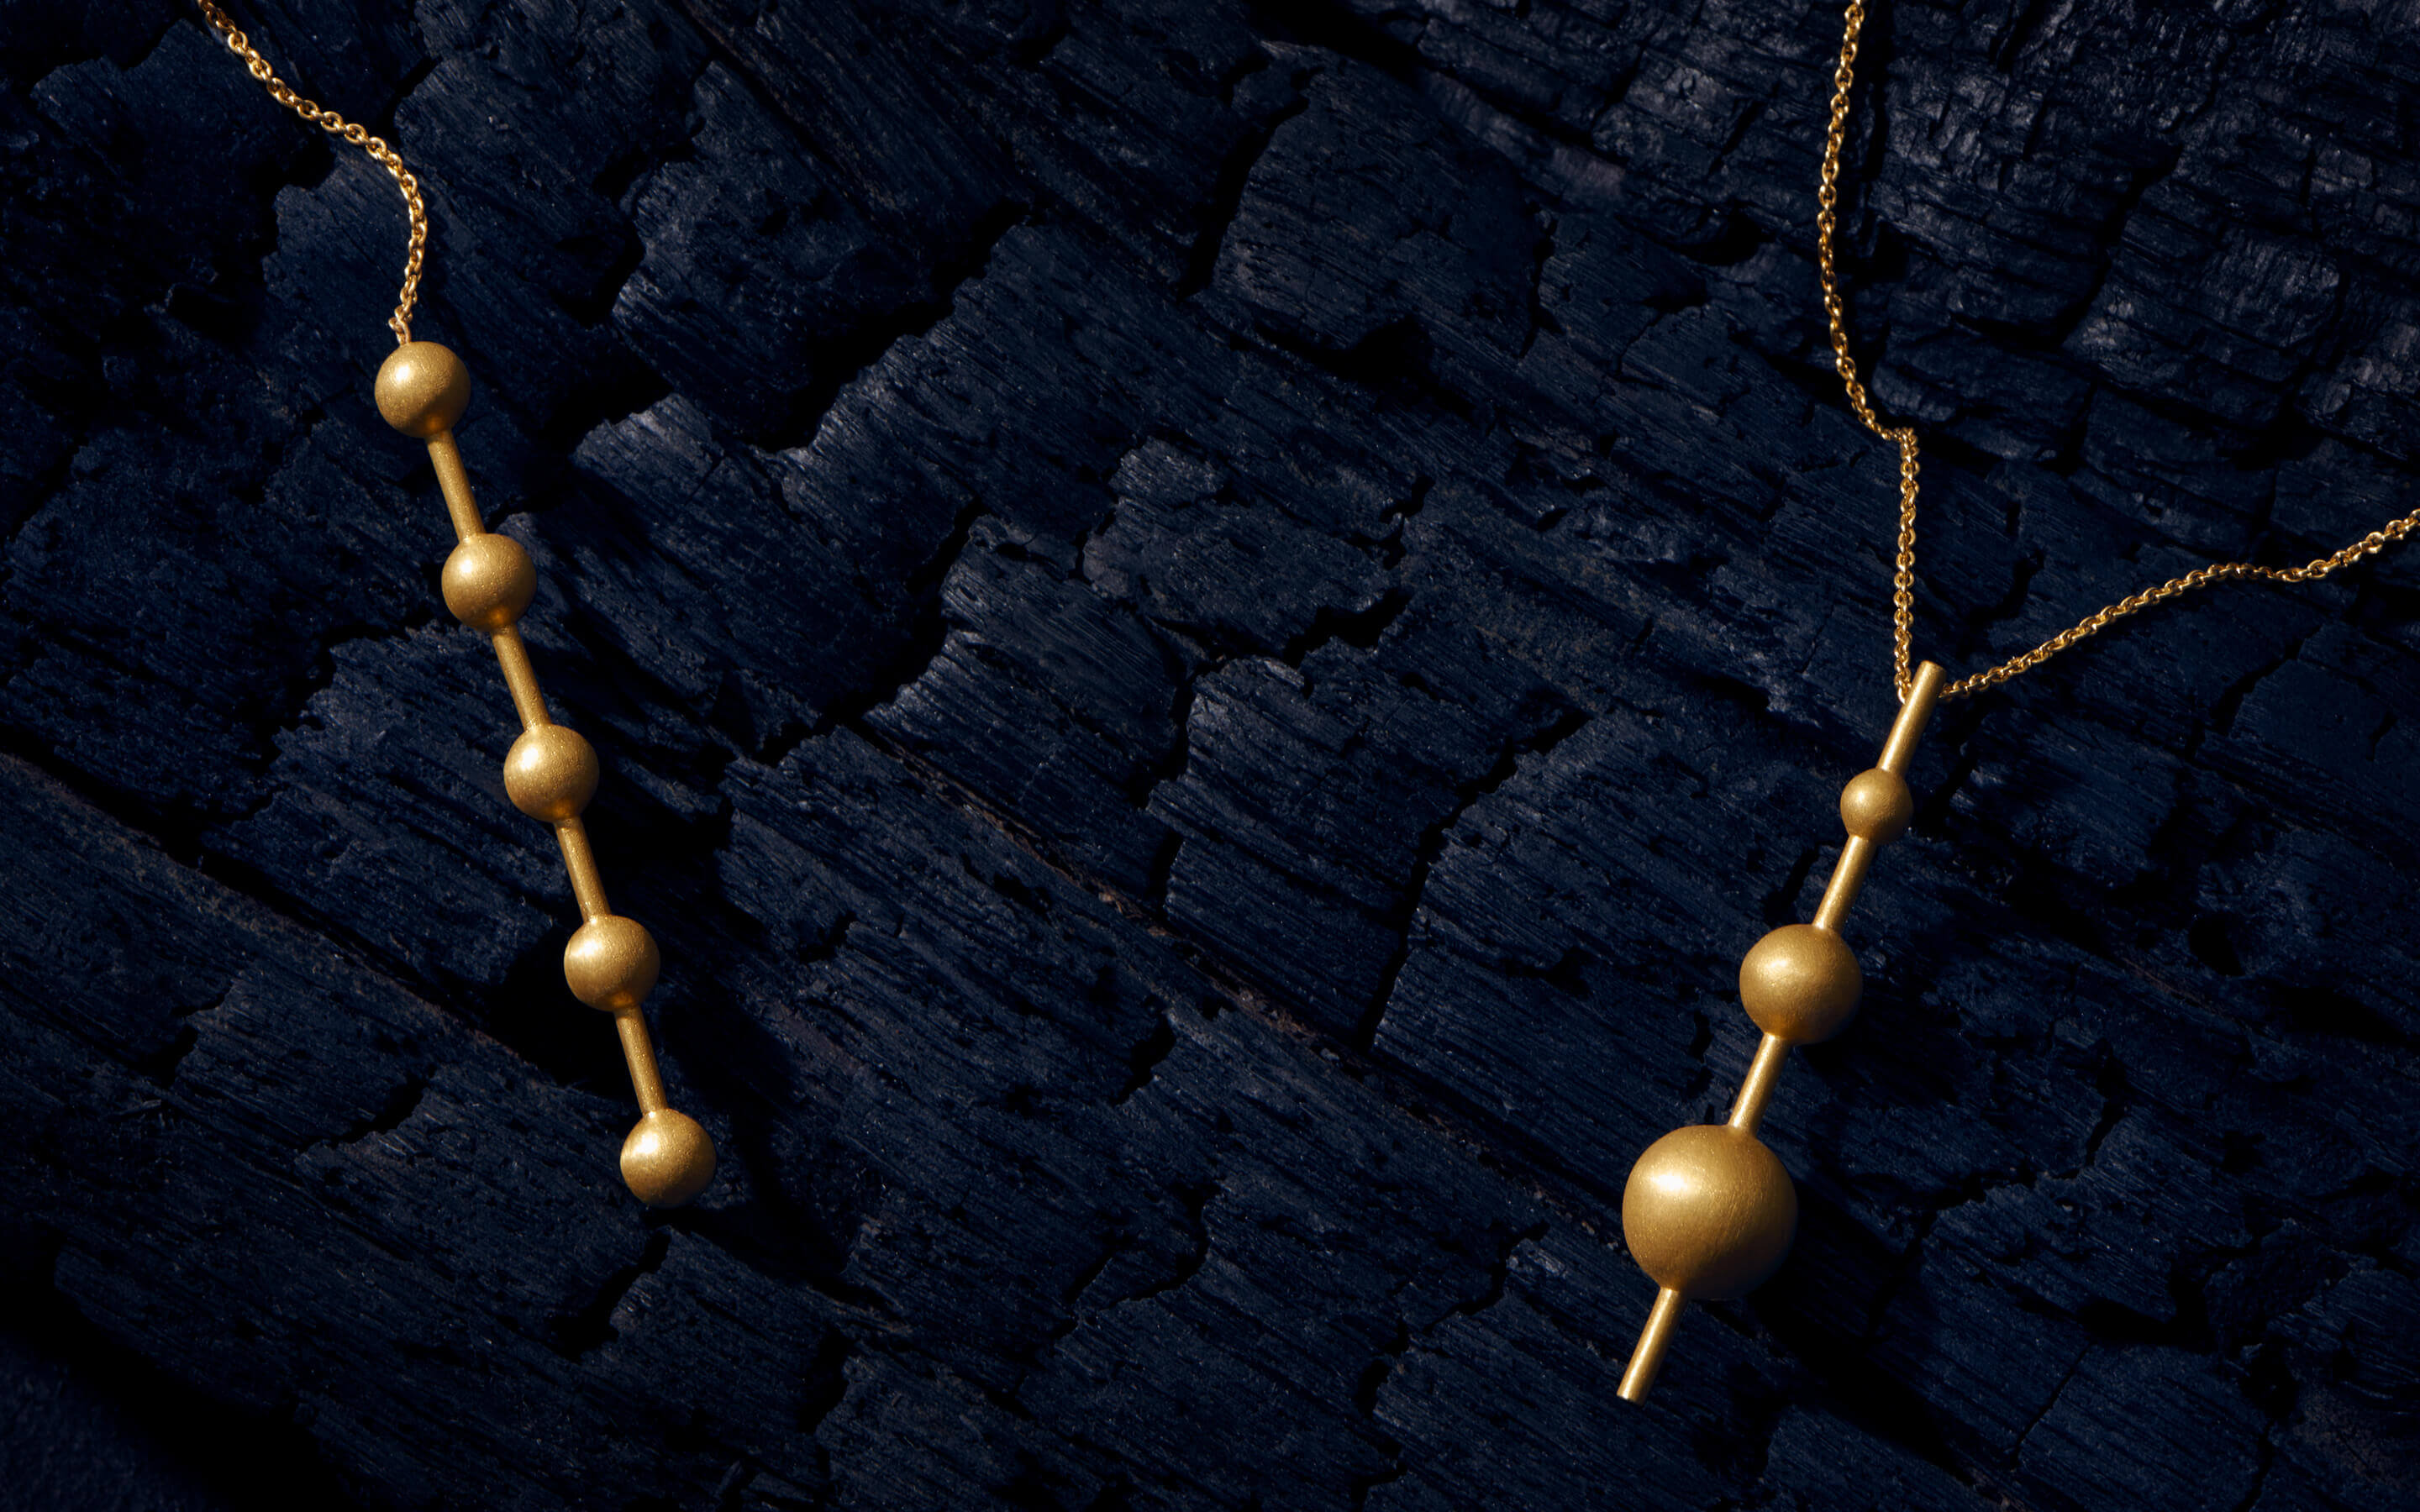 Auvere 22 and 24 karat gold jewelry from the Cosmic Gold campaign